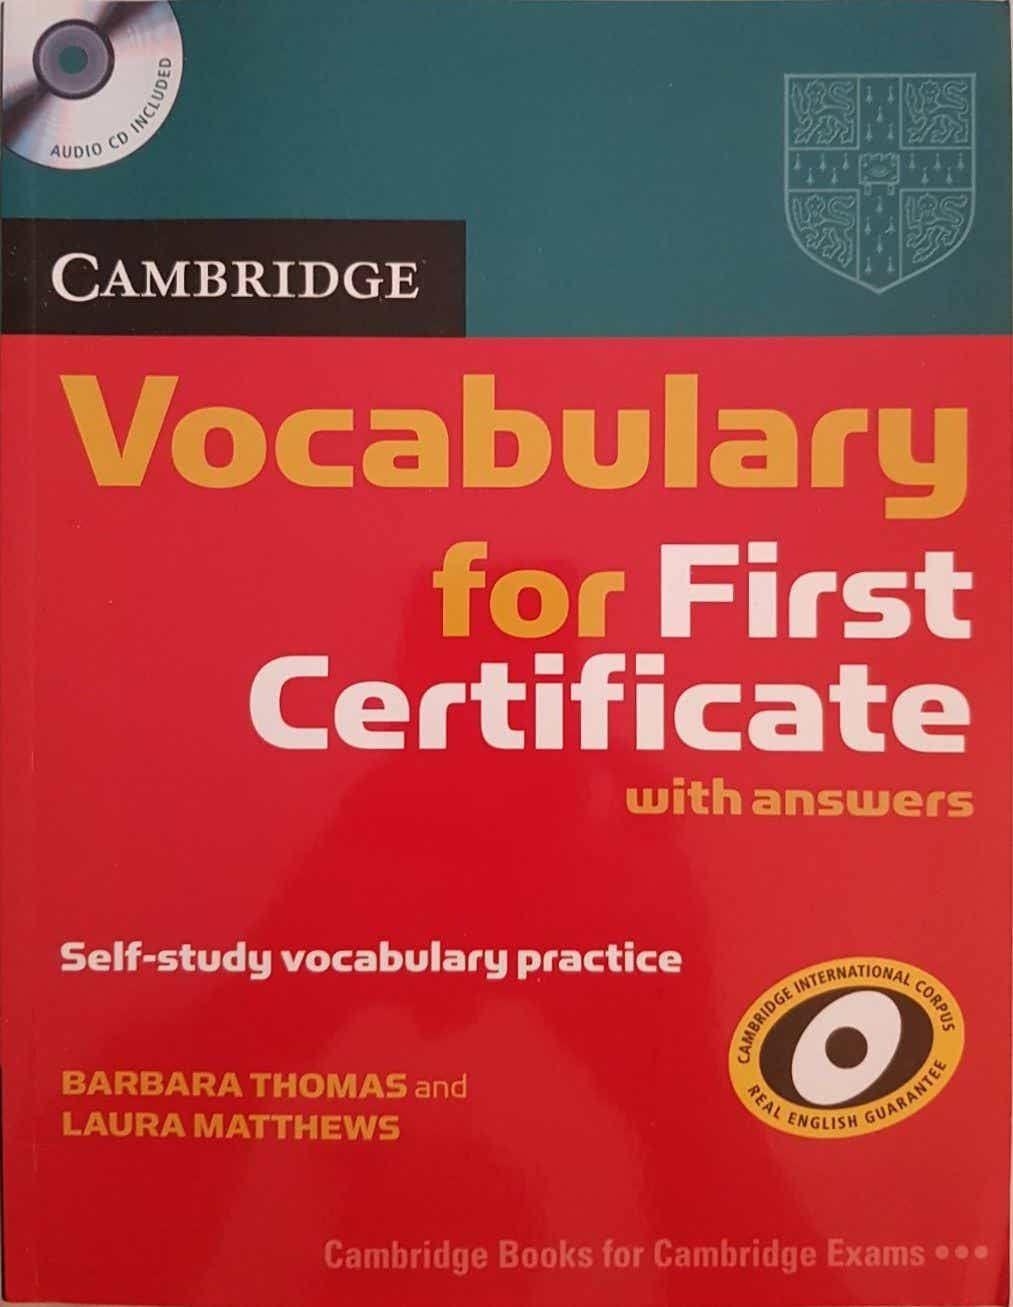 Vocabulary for First Certificate Like New Not Appicable  (4619394514999)